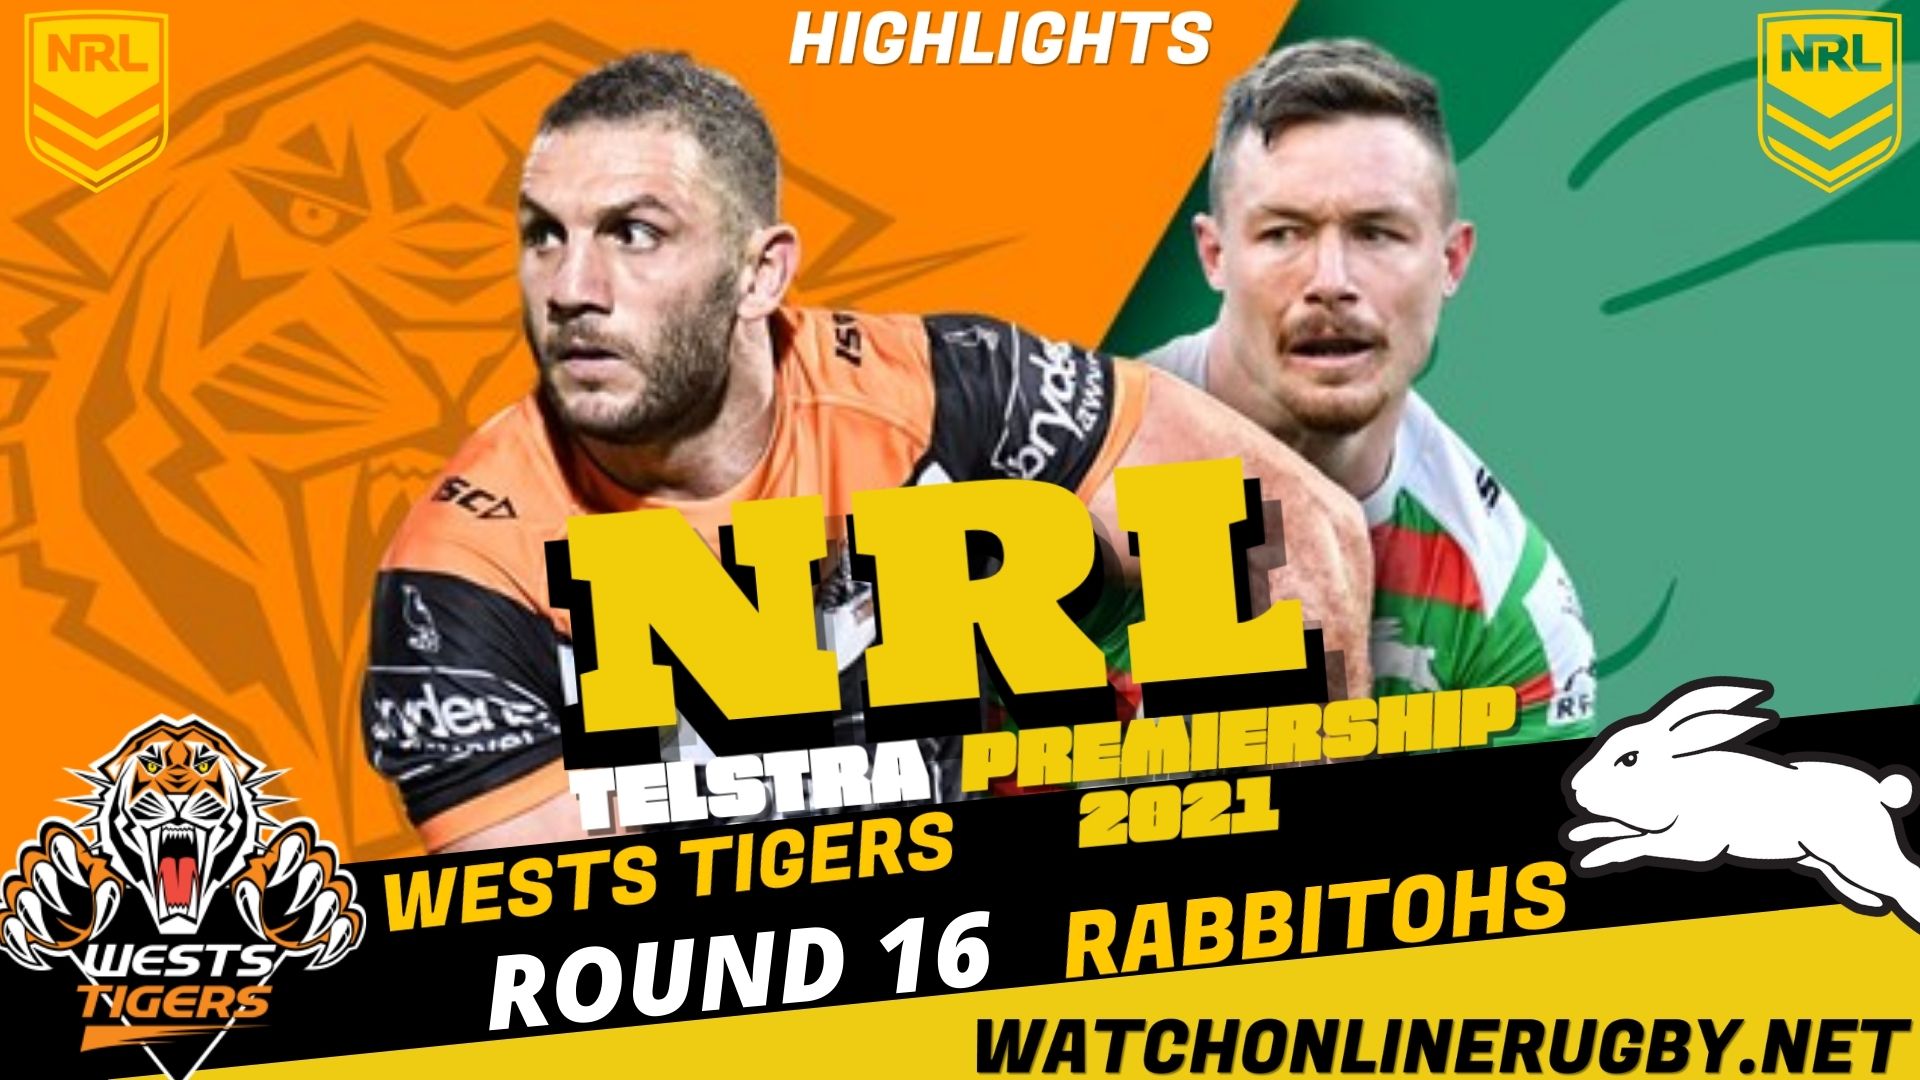 Wests Tigers Vs Rabbitohs Highlights RD 16 NRL Rugby